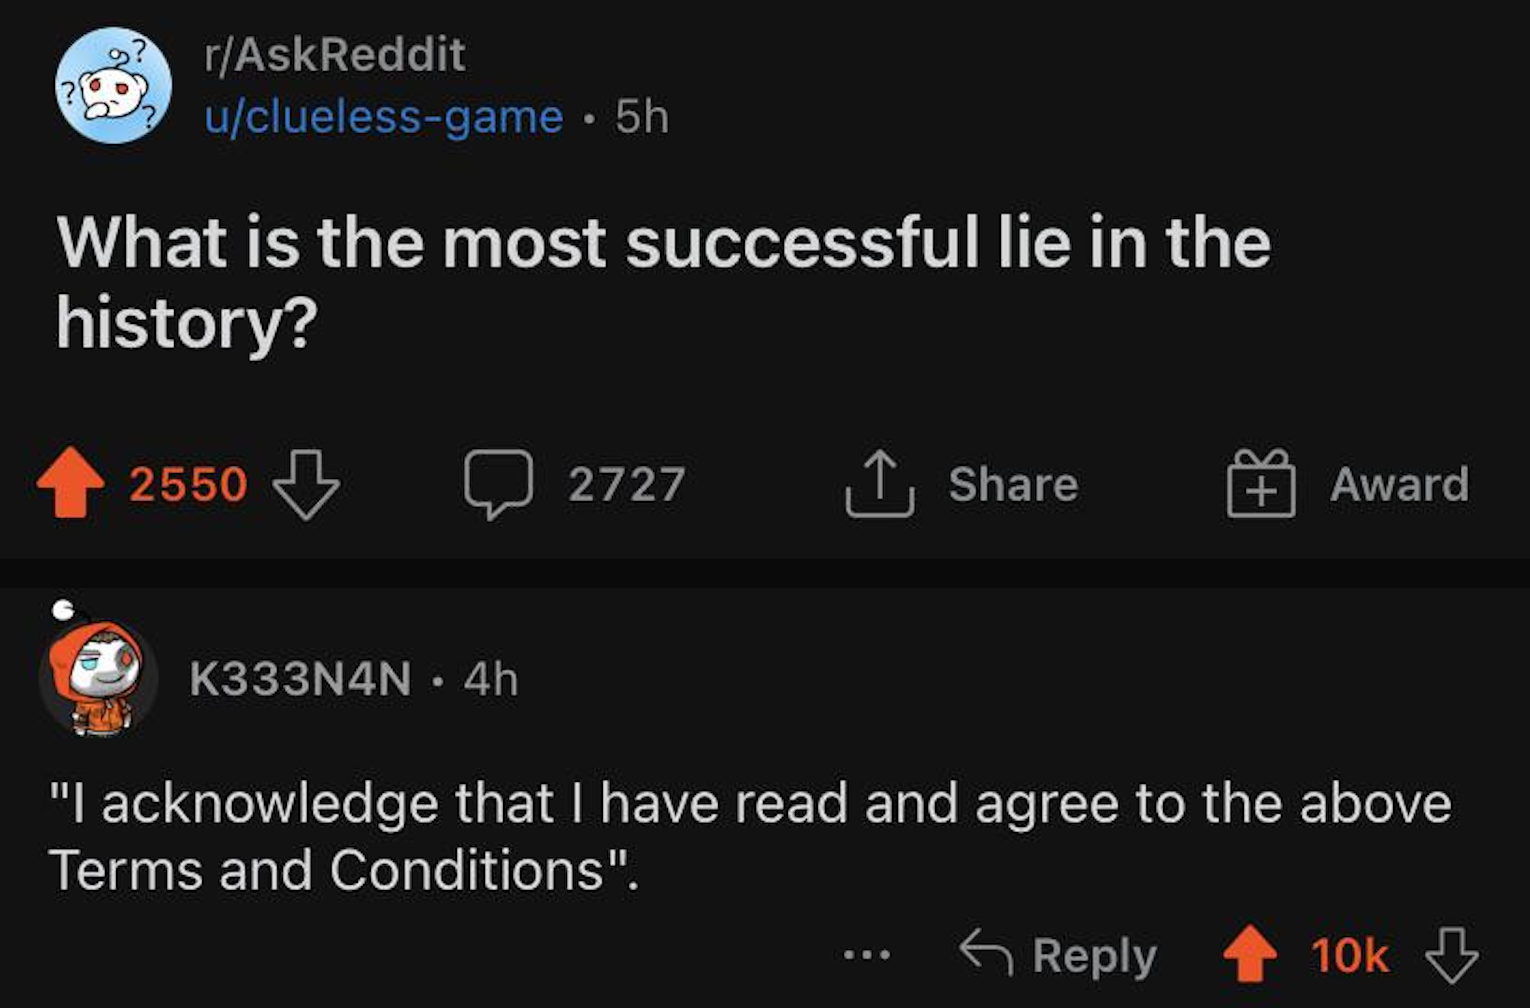 the most successful lie in history: i acknowledge that i have read and agree to the above terms and conditions